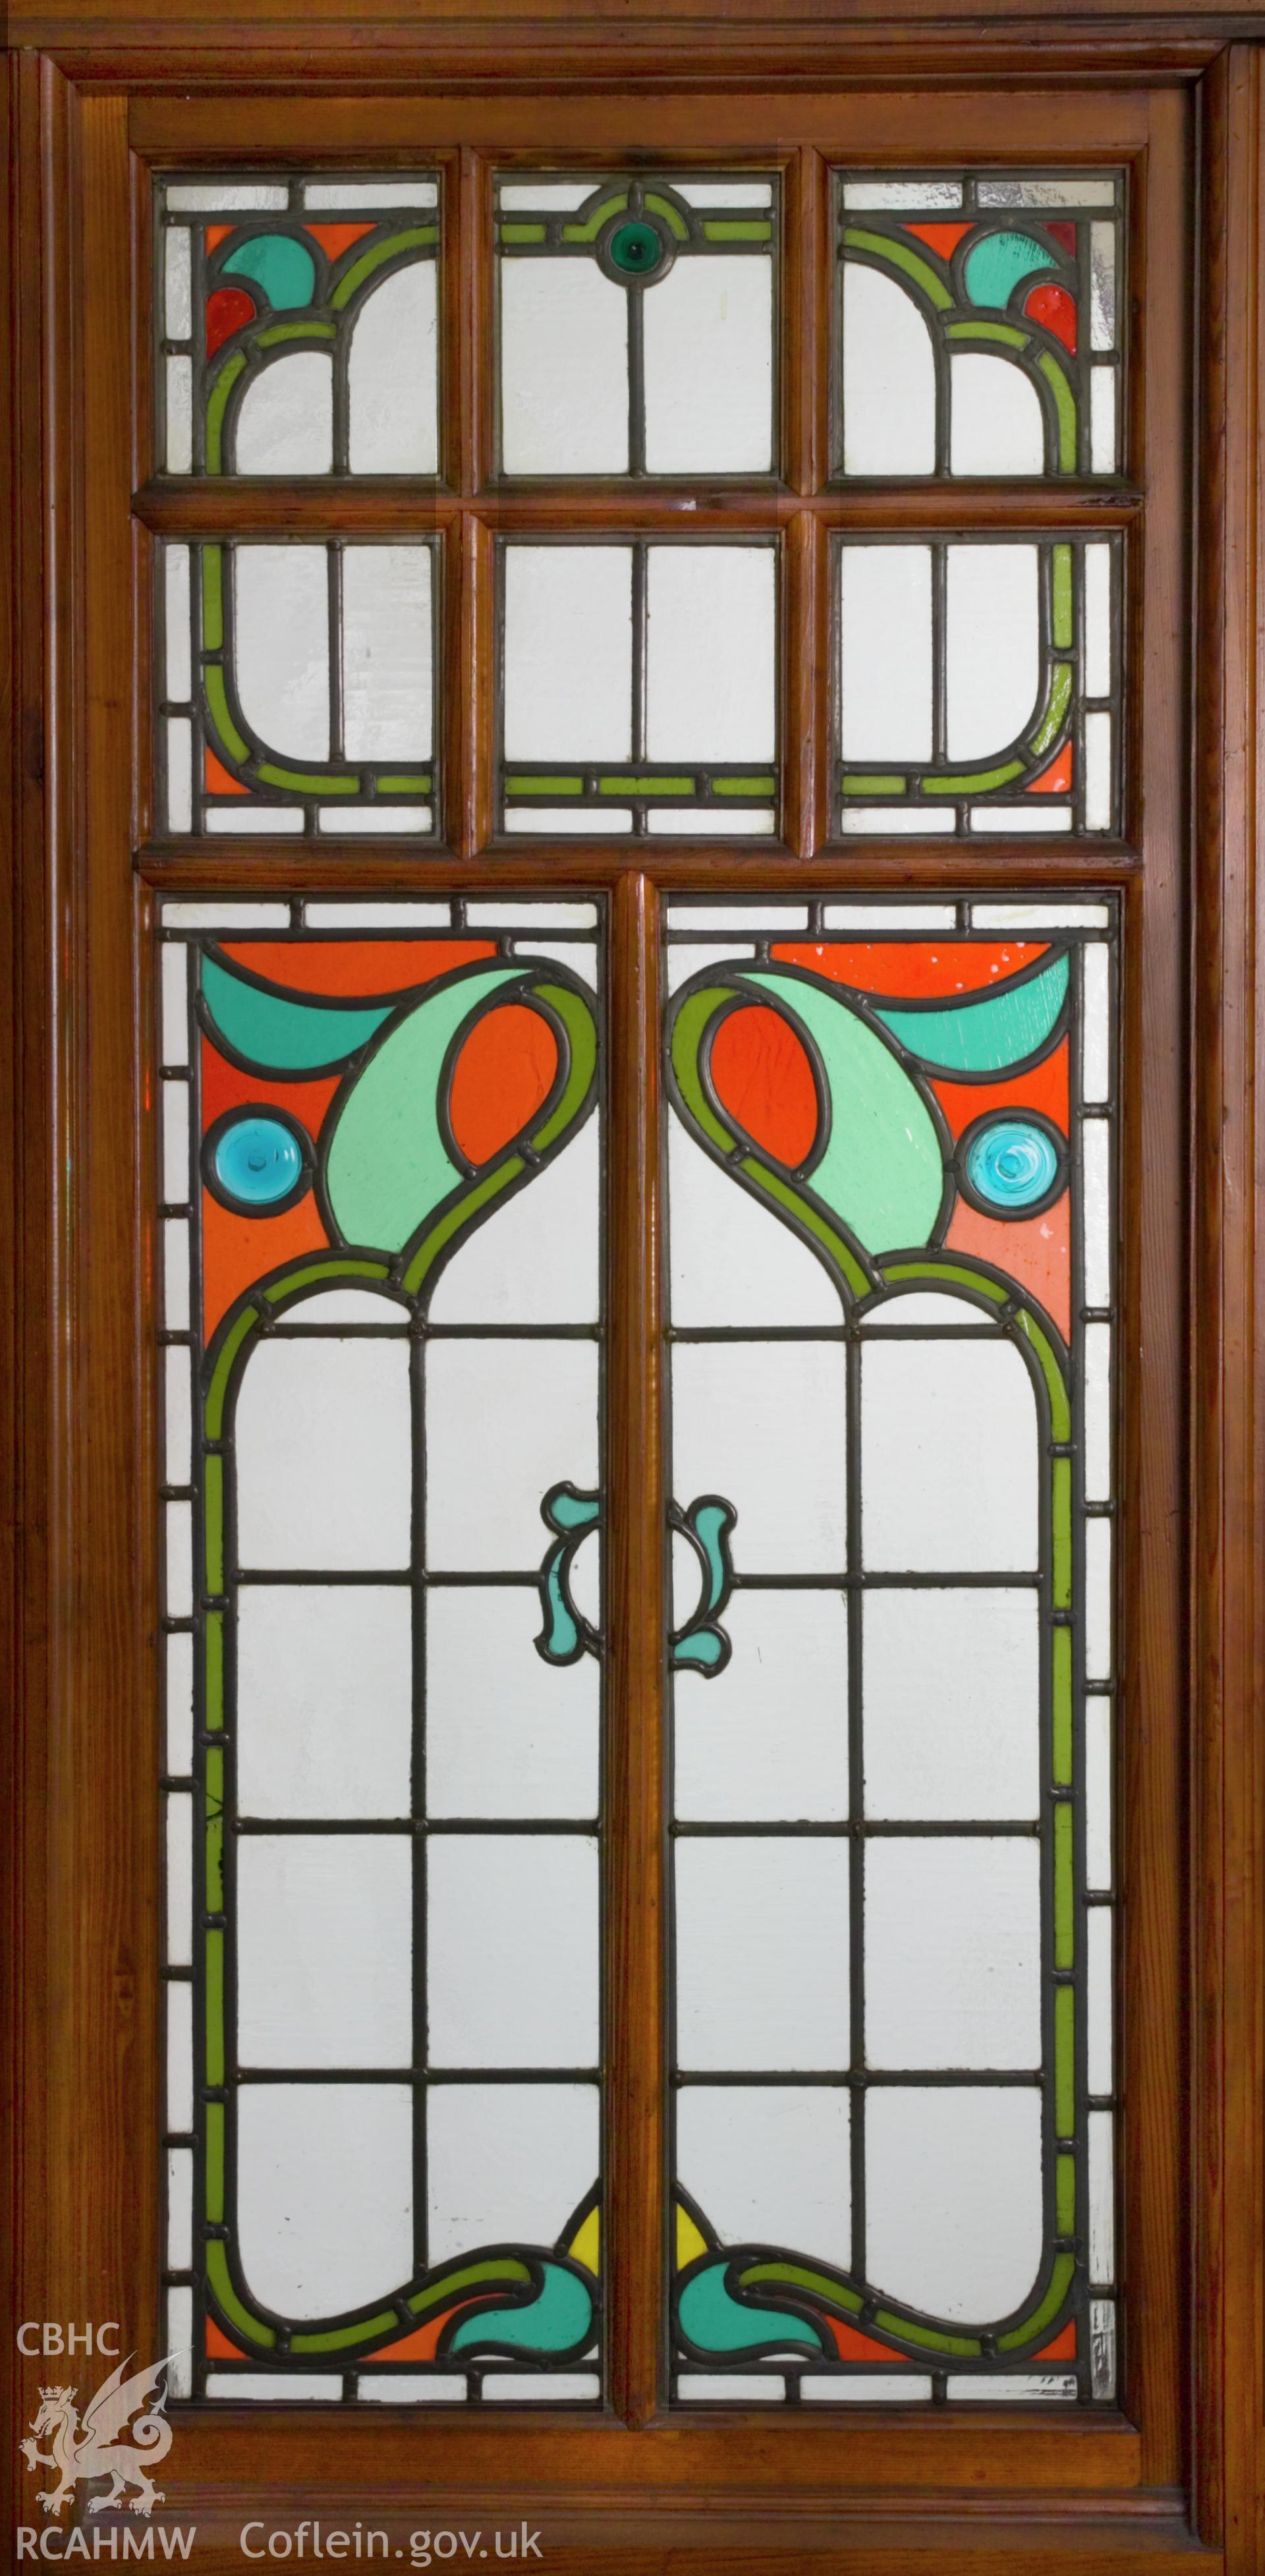 Section of rear stained glass screen.